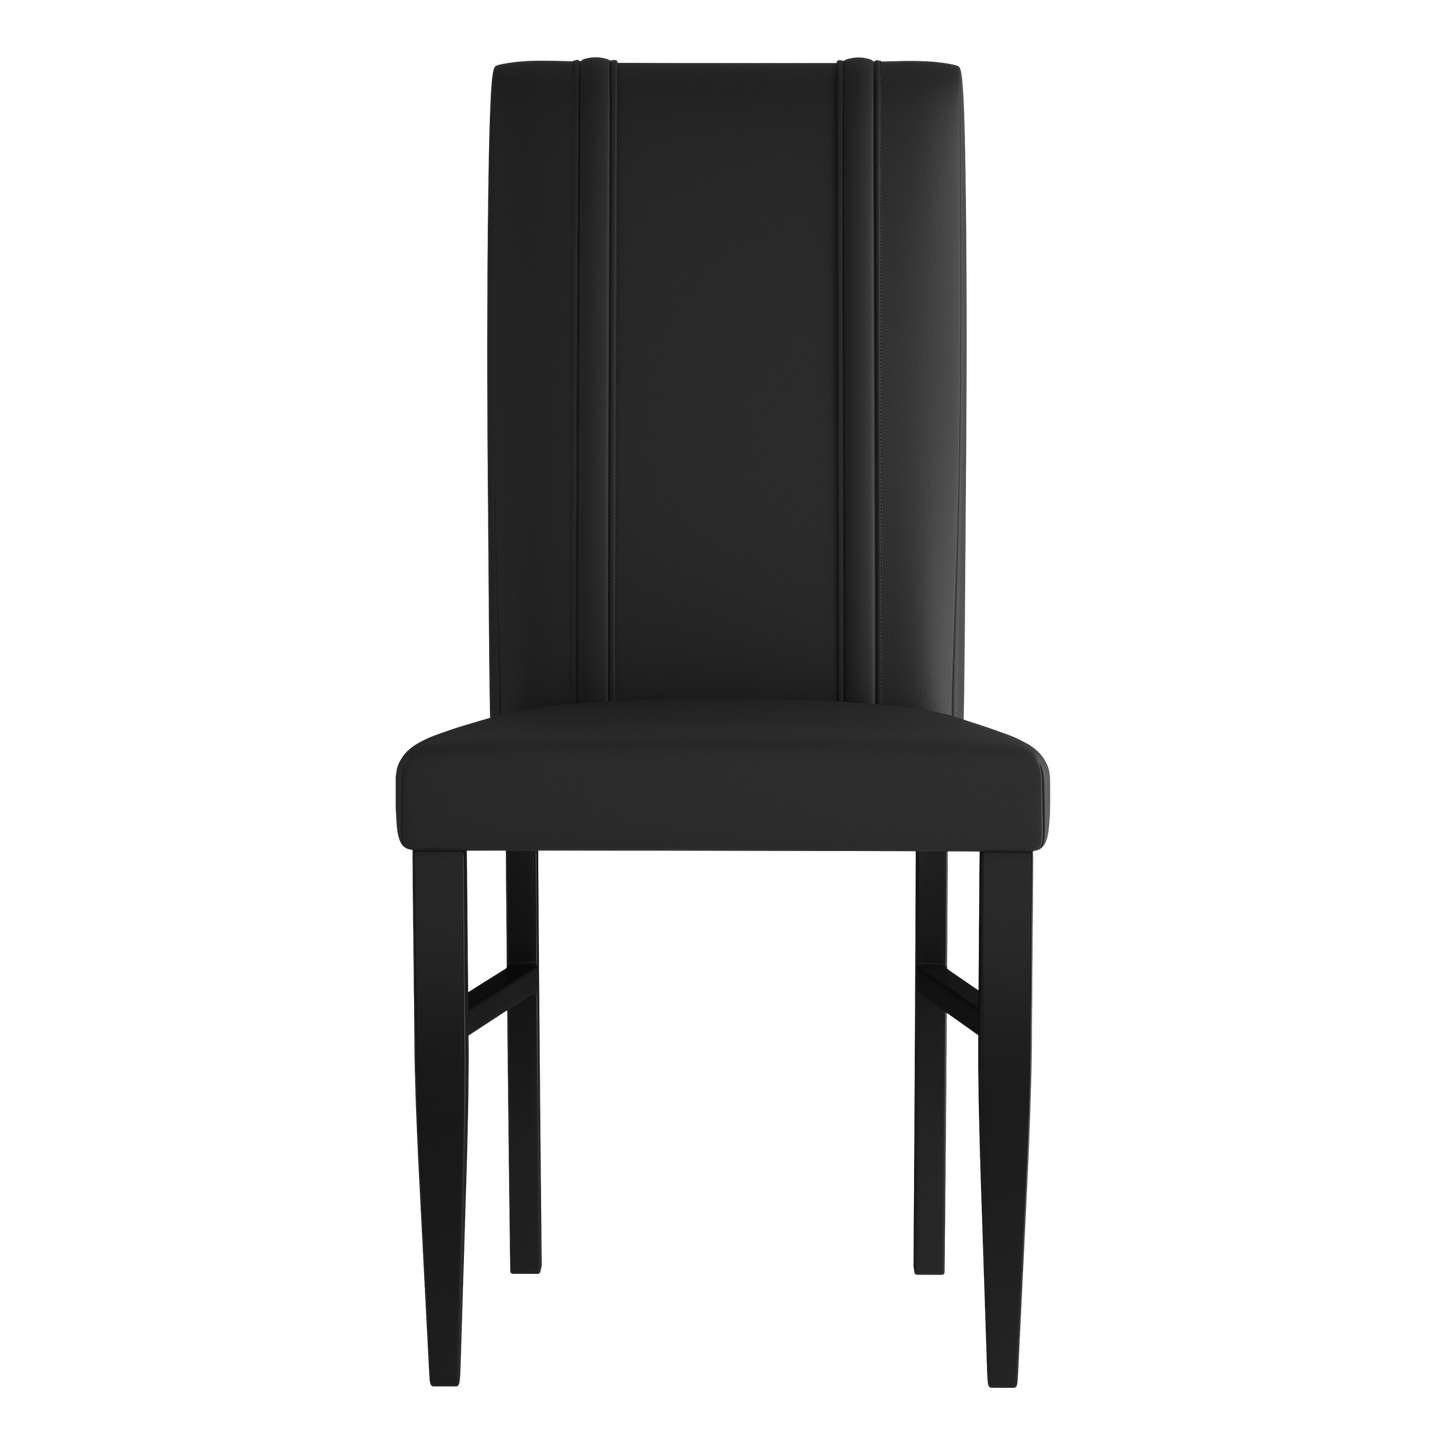 Side Chair 2000 with  Carolina Panthers Secondary Logo Set of 2